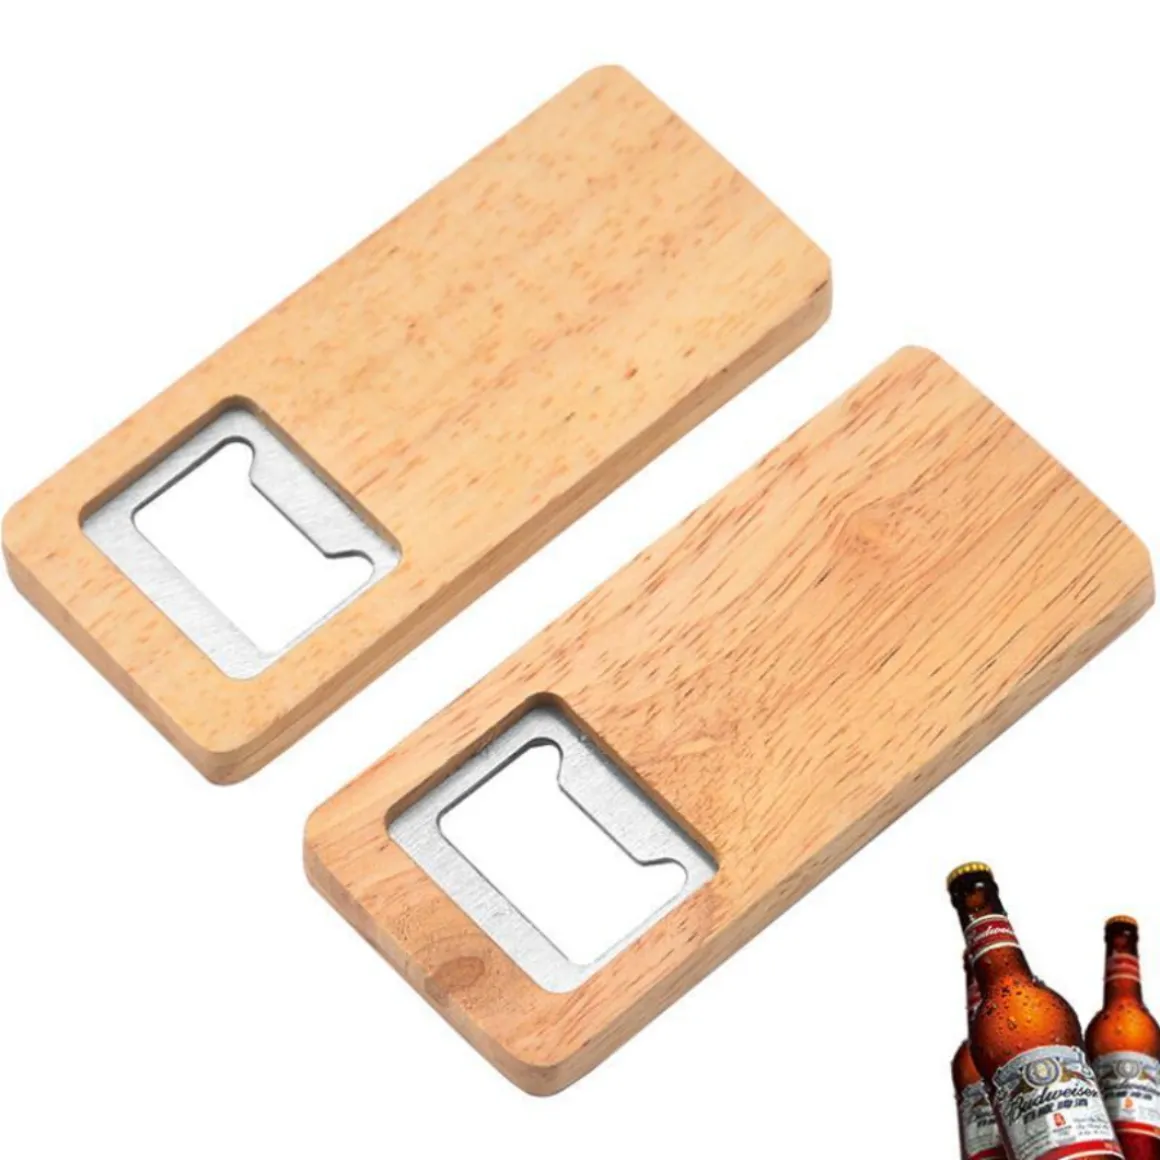 Wood Beer Bottle Opener Stainless Steel with Square Wooden Handle Openers Bar Kitchen Accessories Party Gift In Stock Xu